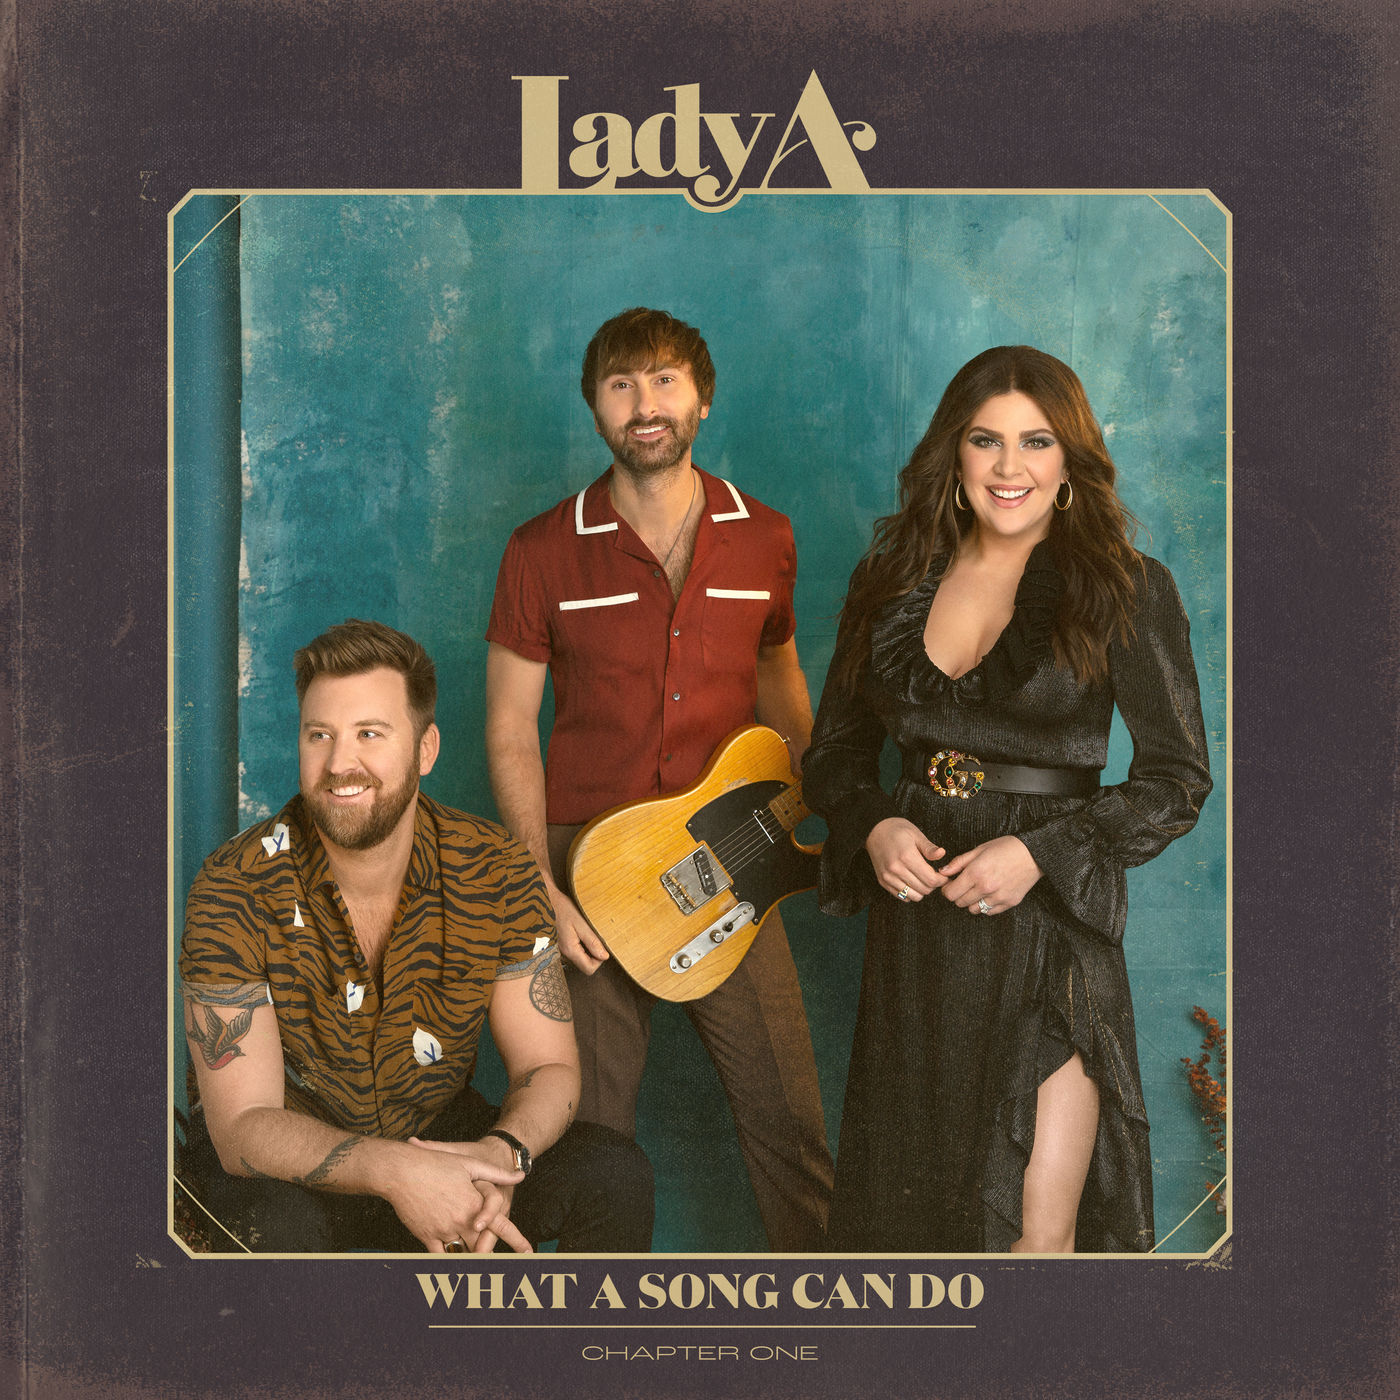 Lady A – What A Song Can Do (Chapter One) (2021) [FLAC 24bit/48kHz]